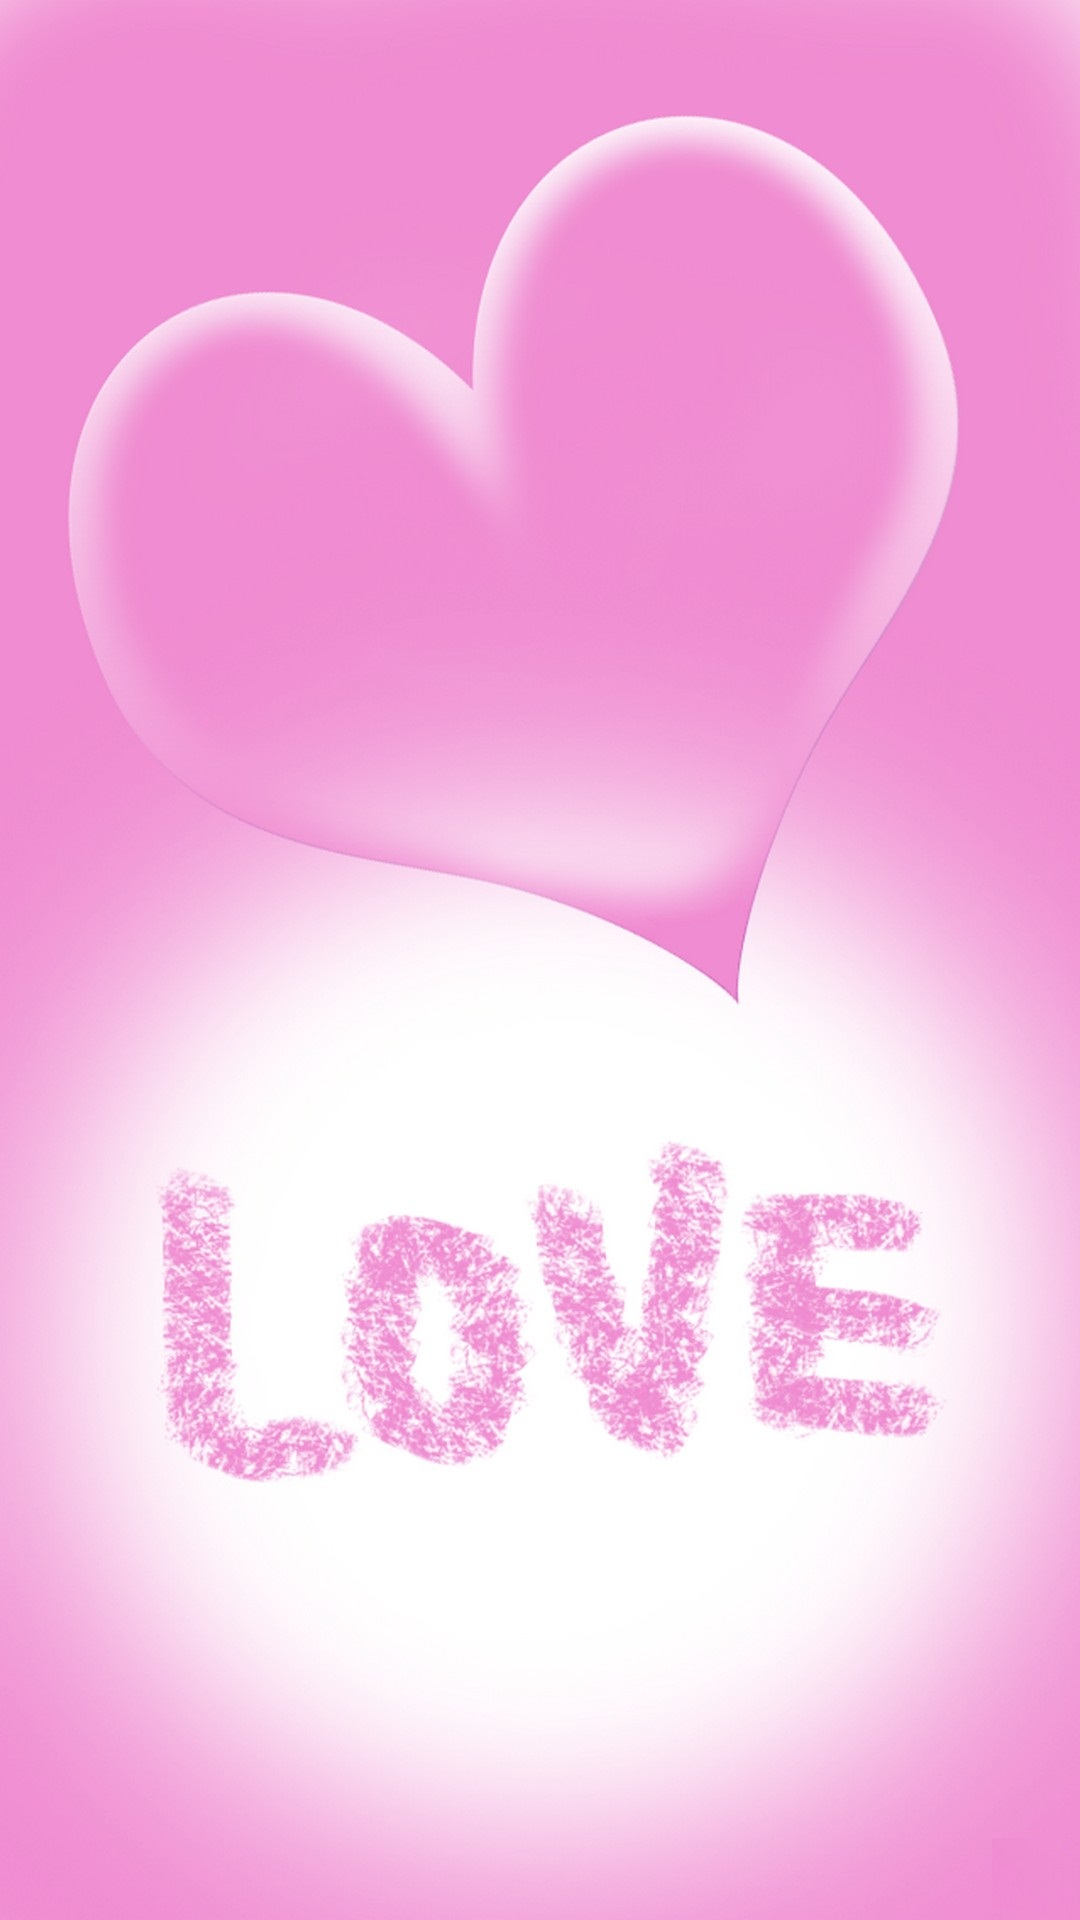 Happy Valentines Day Wallpaper Android with HD resolution 1080x1920